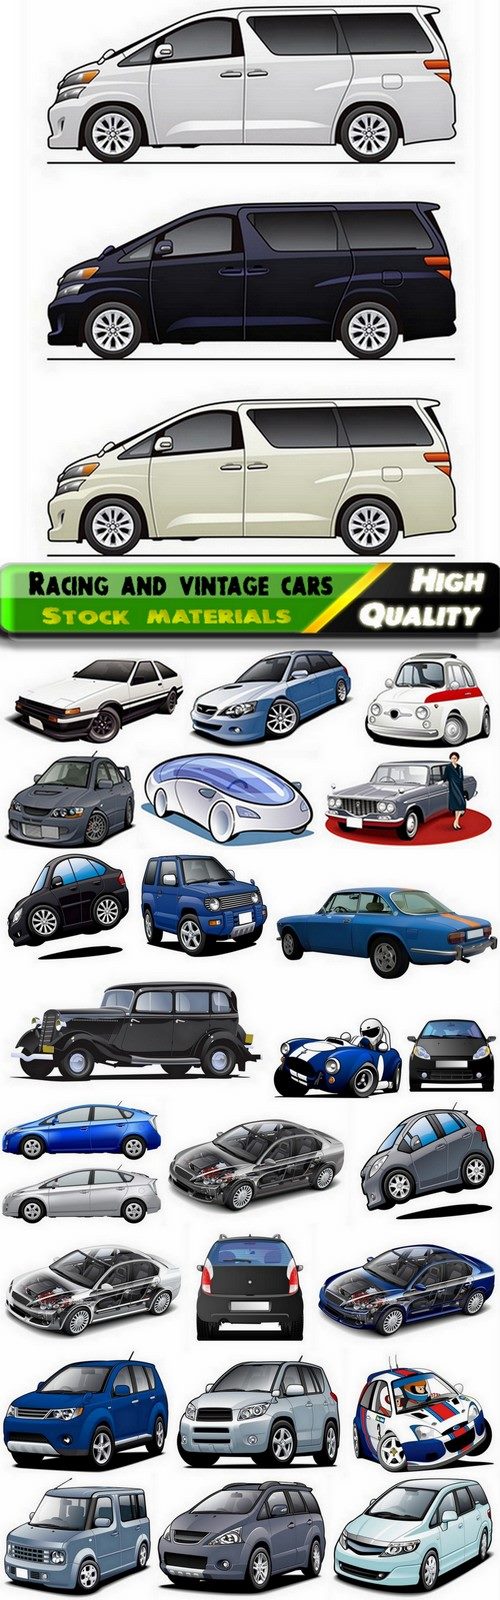 Cars racing and vintage cars illustrations - 25 HQ Jpg